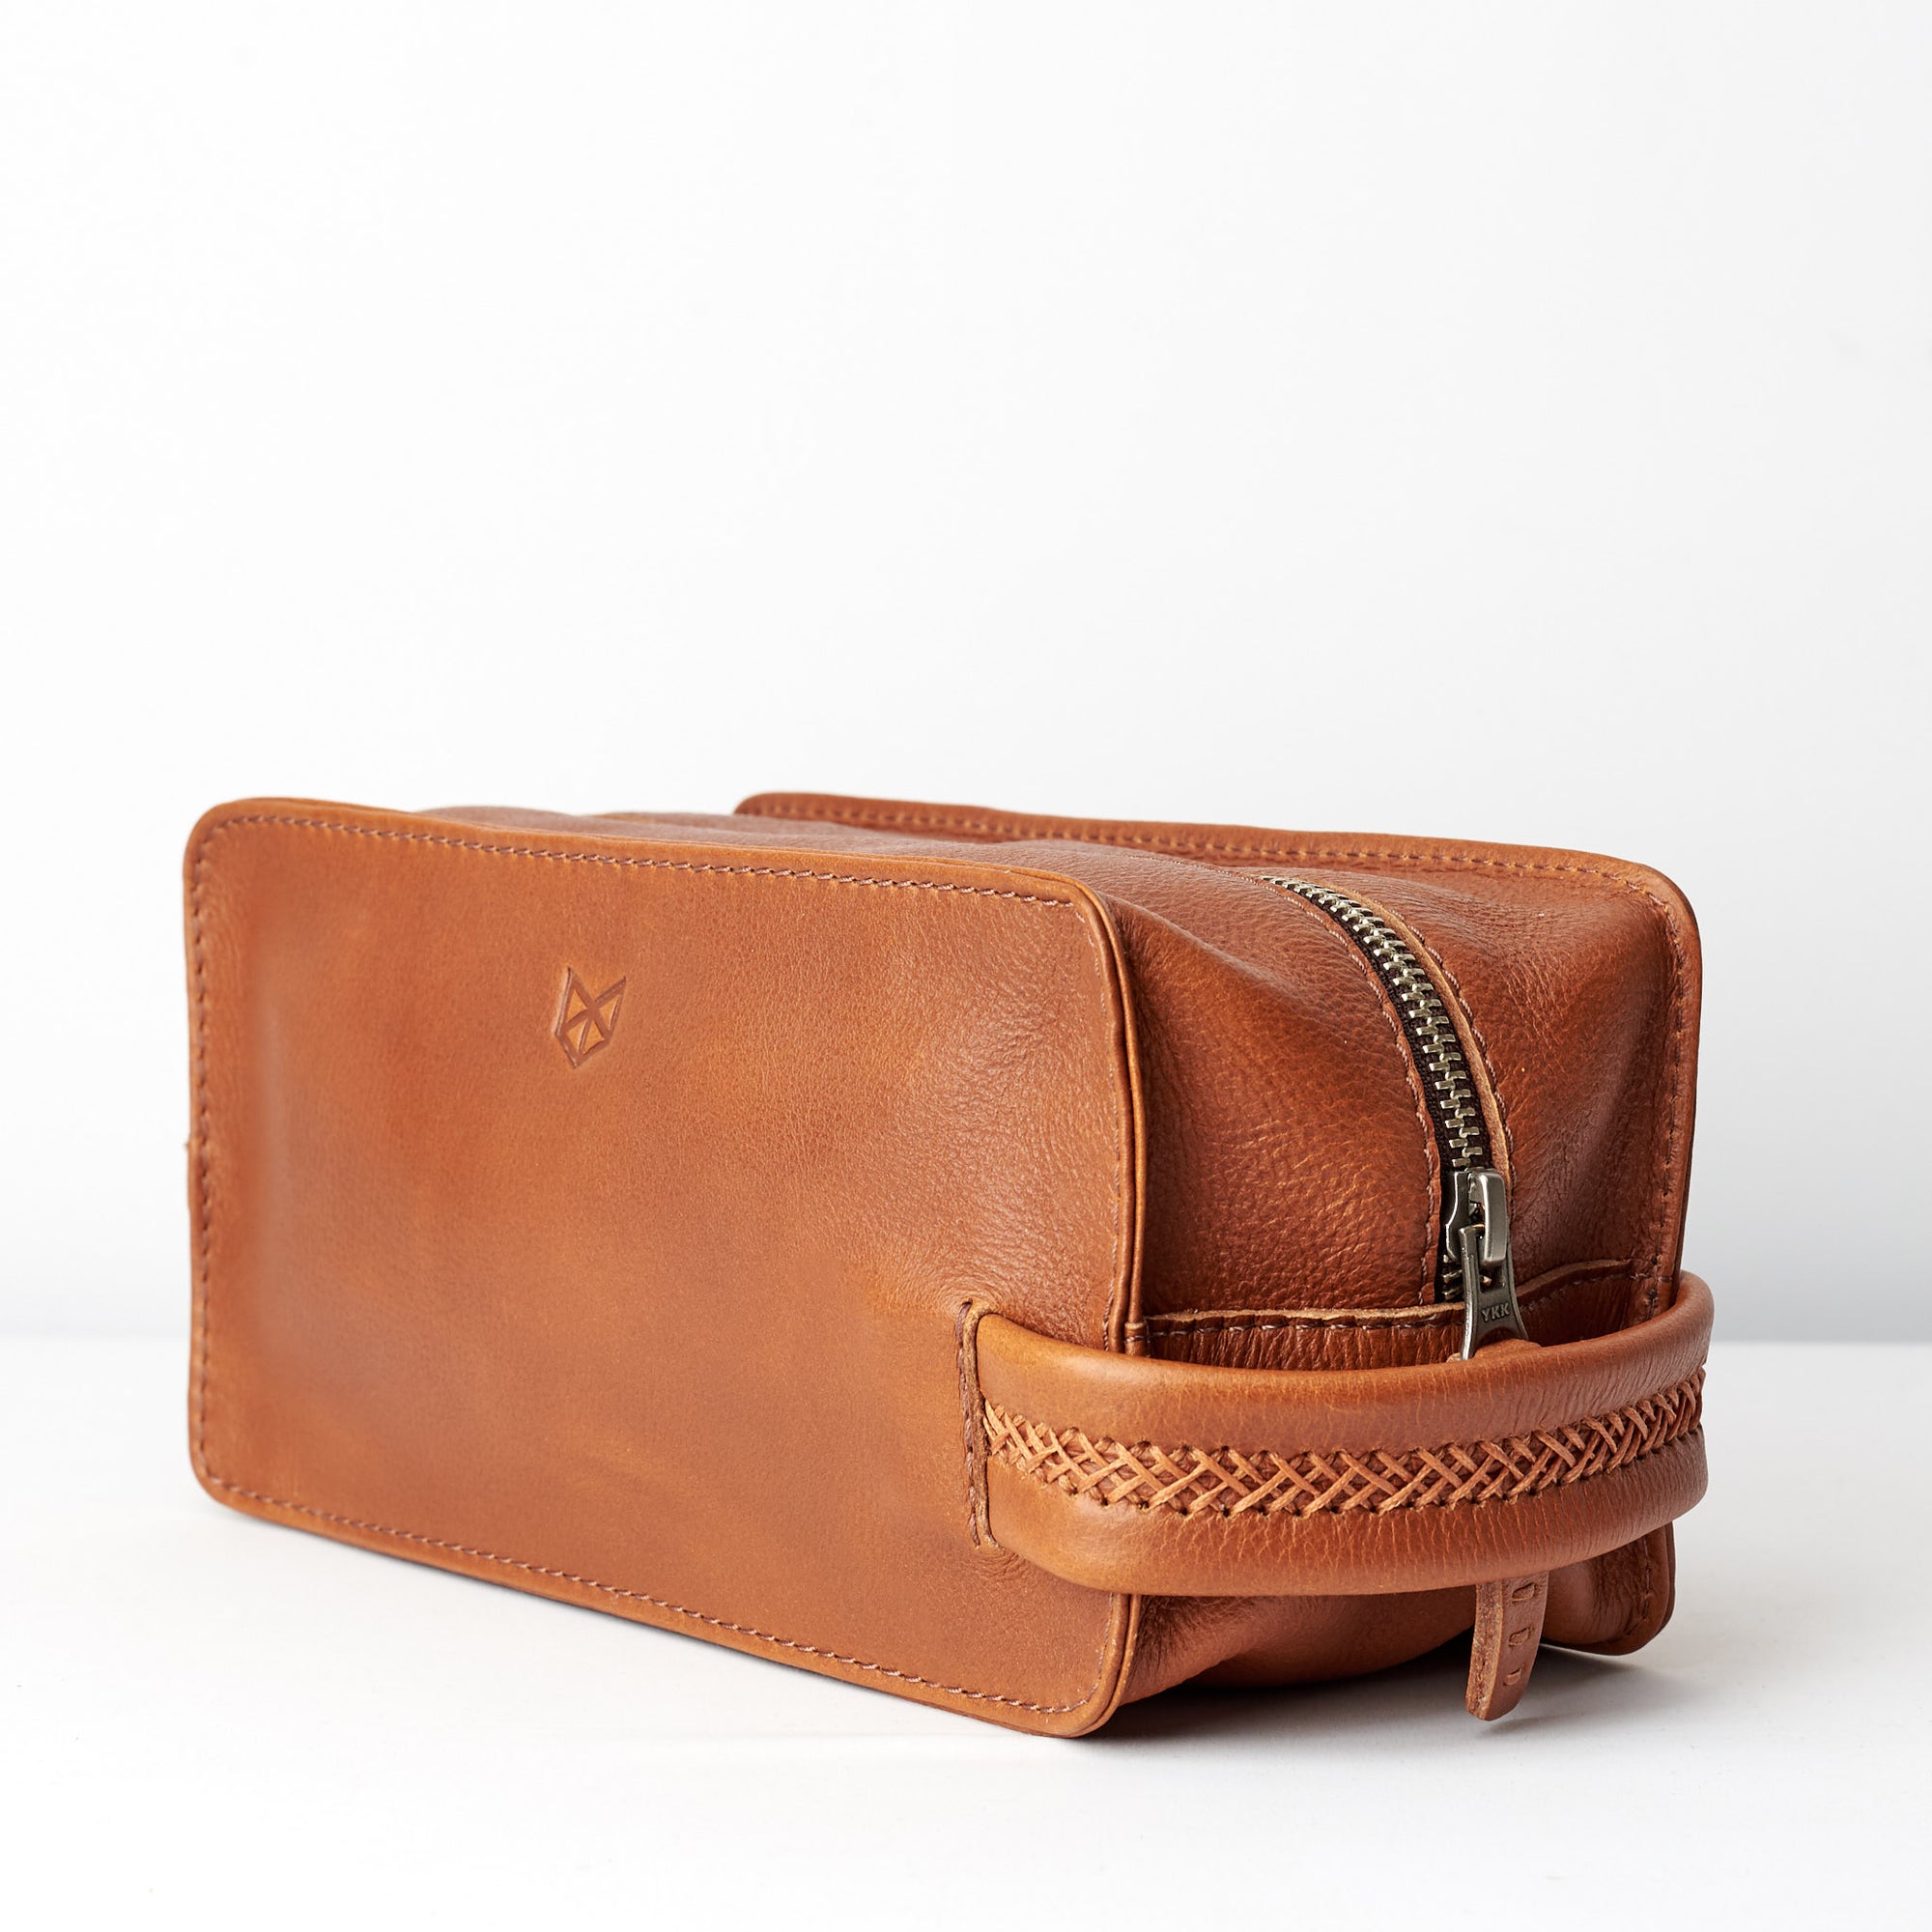 Side view. Tan leather toiletry, shaving bag with hand stitched handle. Groomsmen gifts. Leather good crafted by Capra Leather 